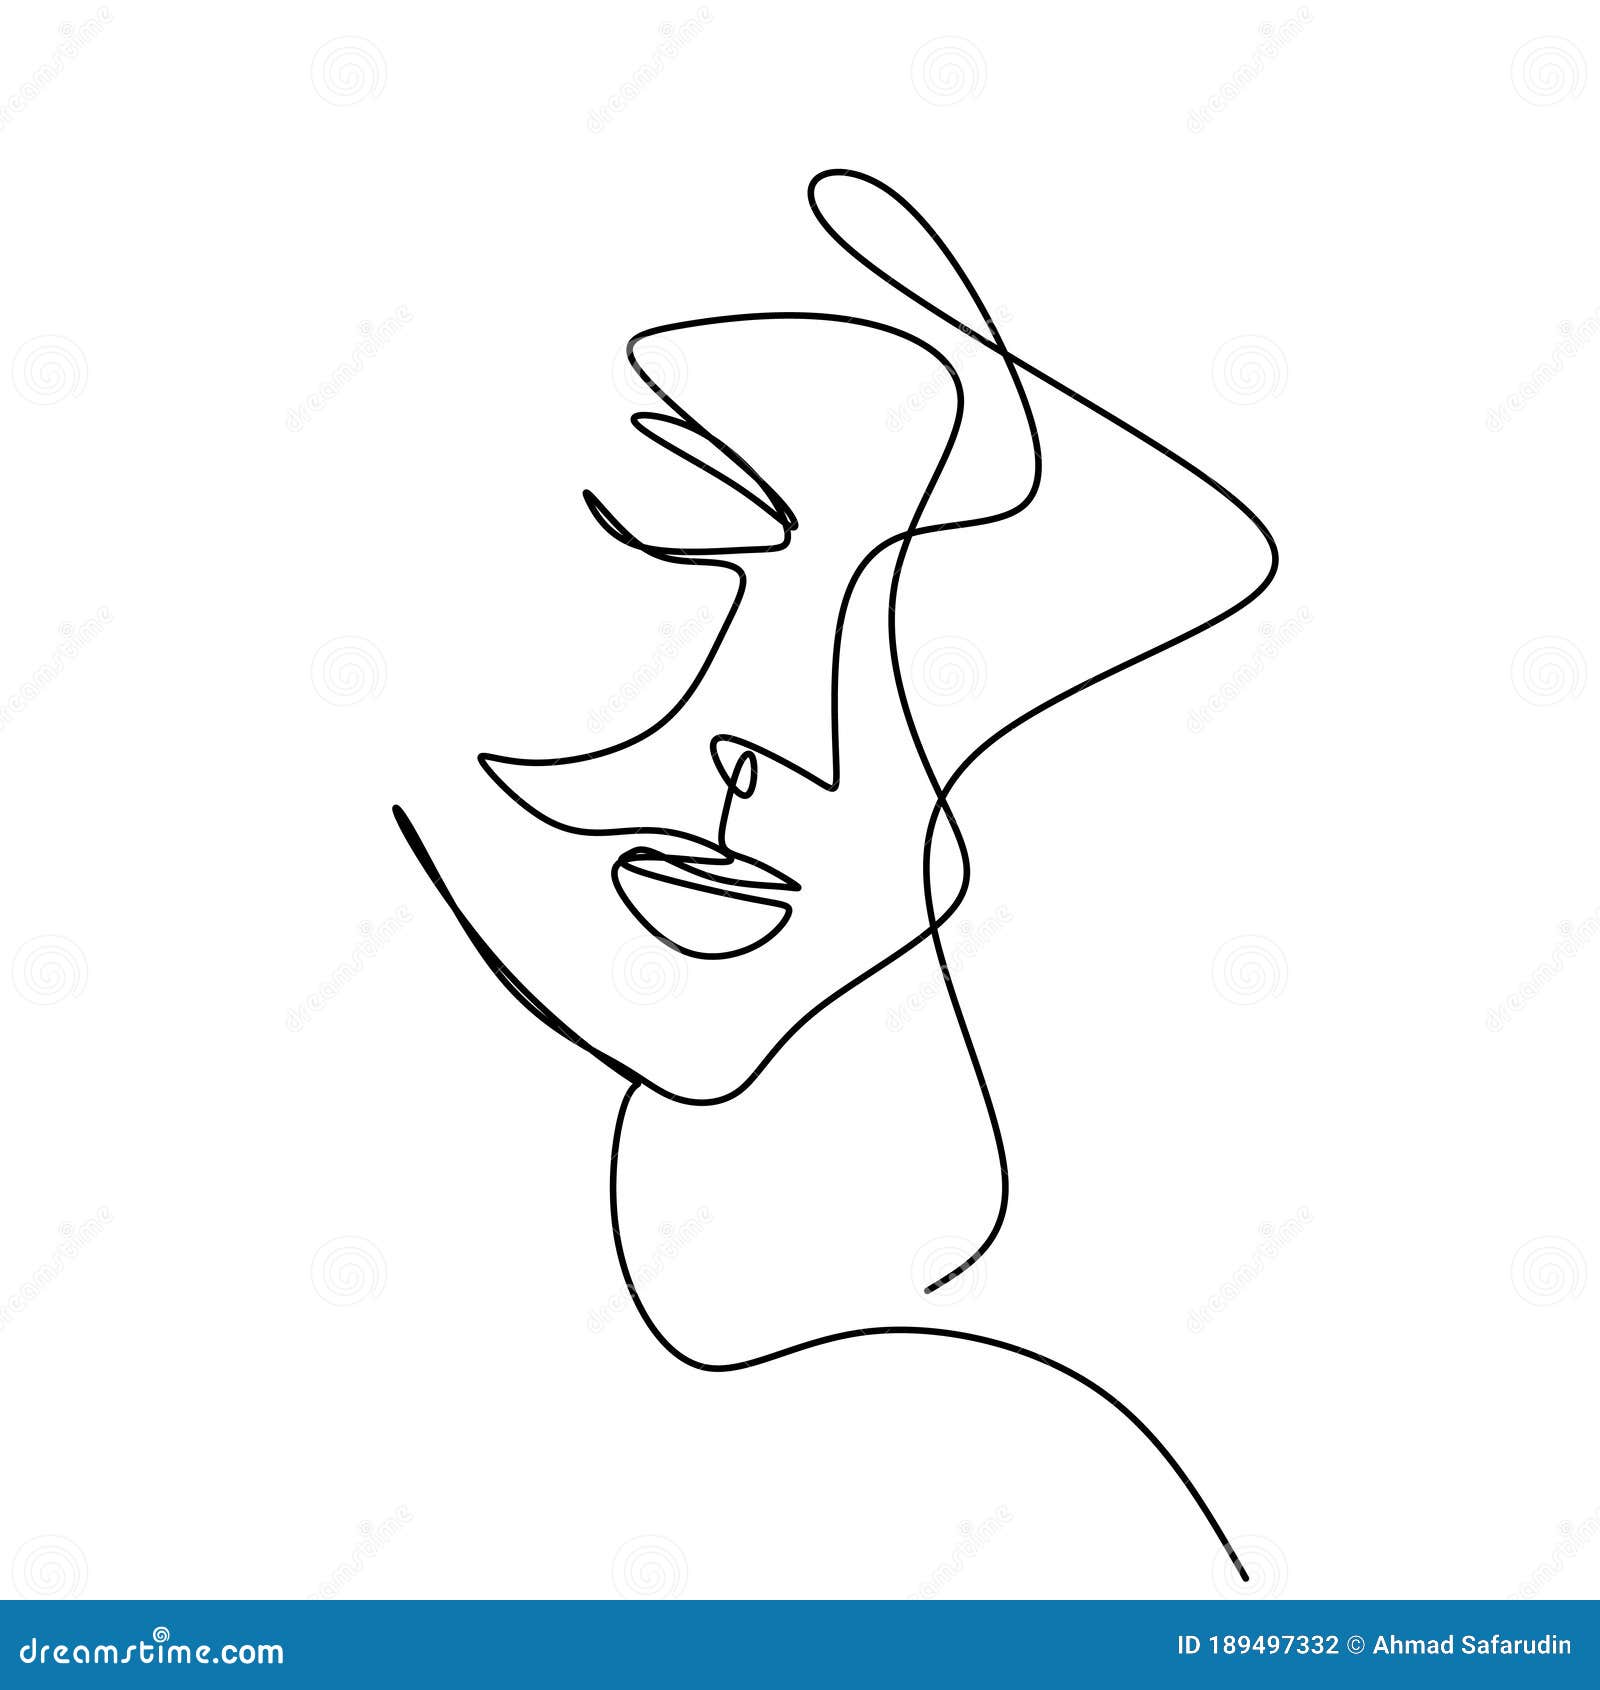 https://thumbs.dreamstime.com/z/vector-abstract-trendy-illustration-one-line-drawing-woman-close-up-beautiful-women-s-face-hand-draw-art-modern-artwork-189497332.jpg